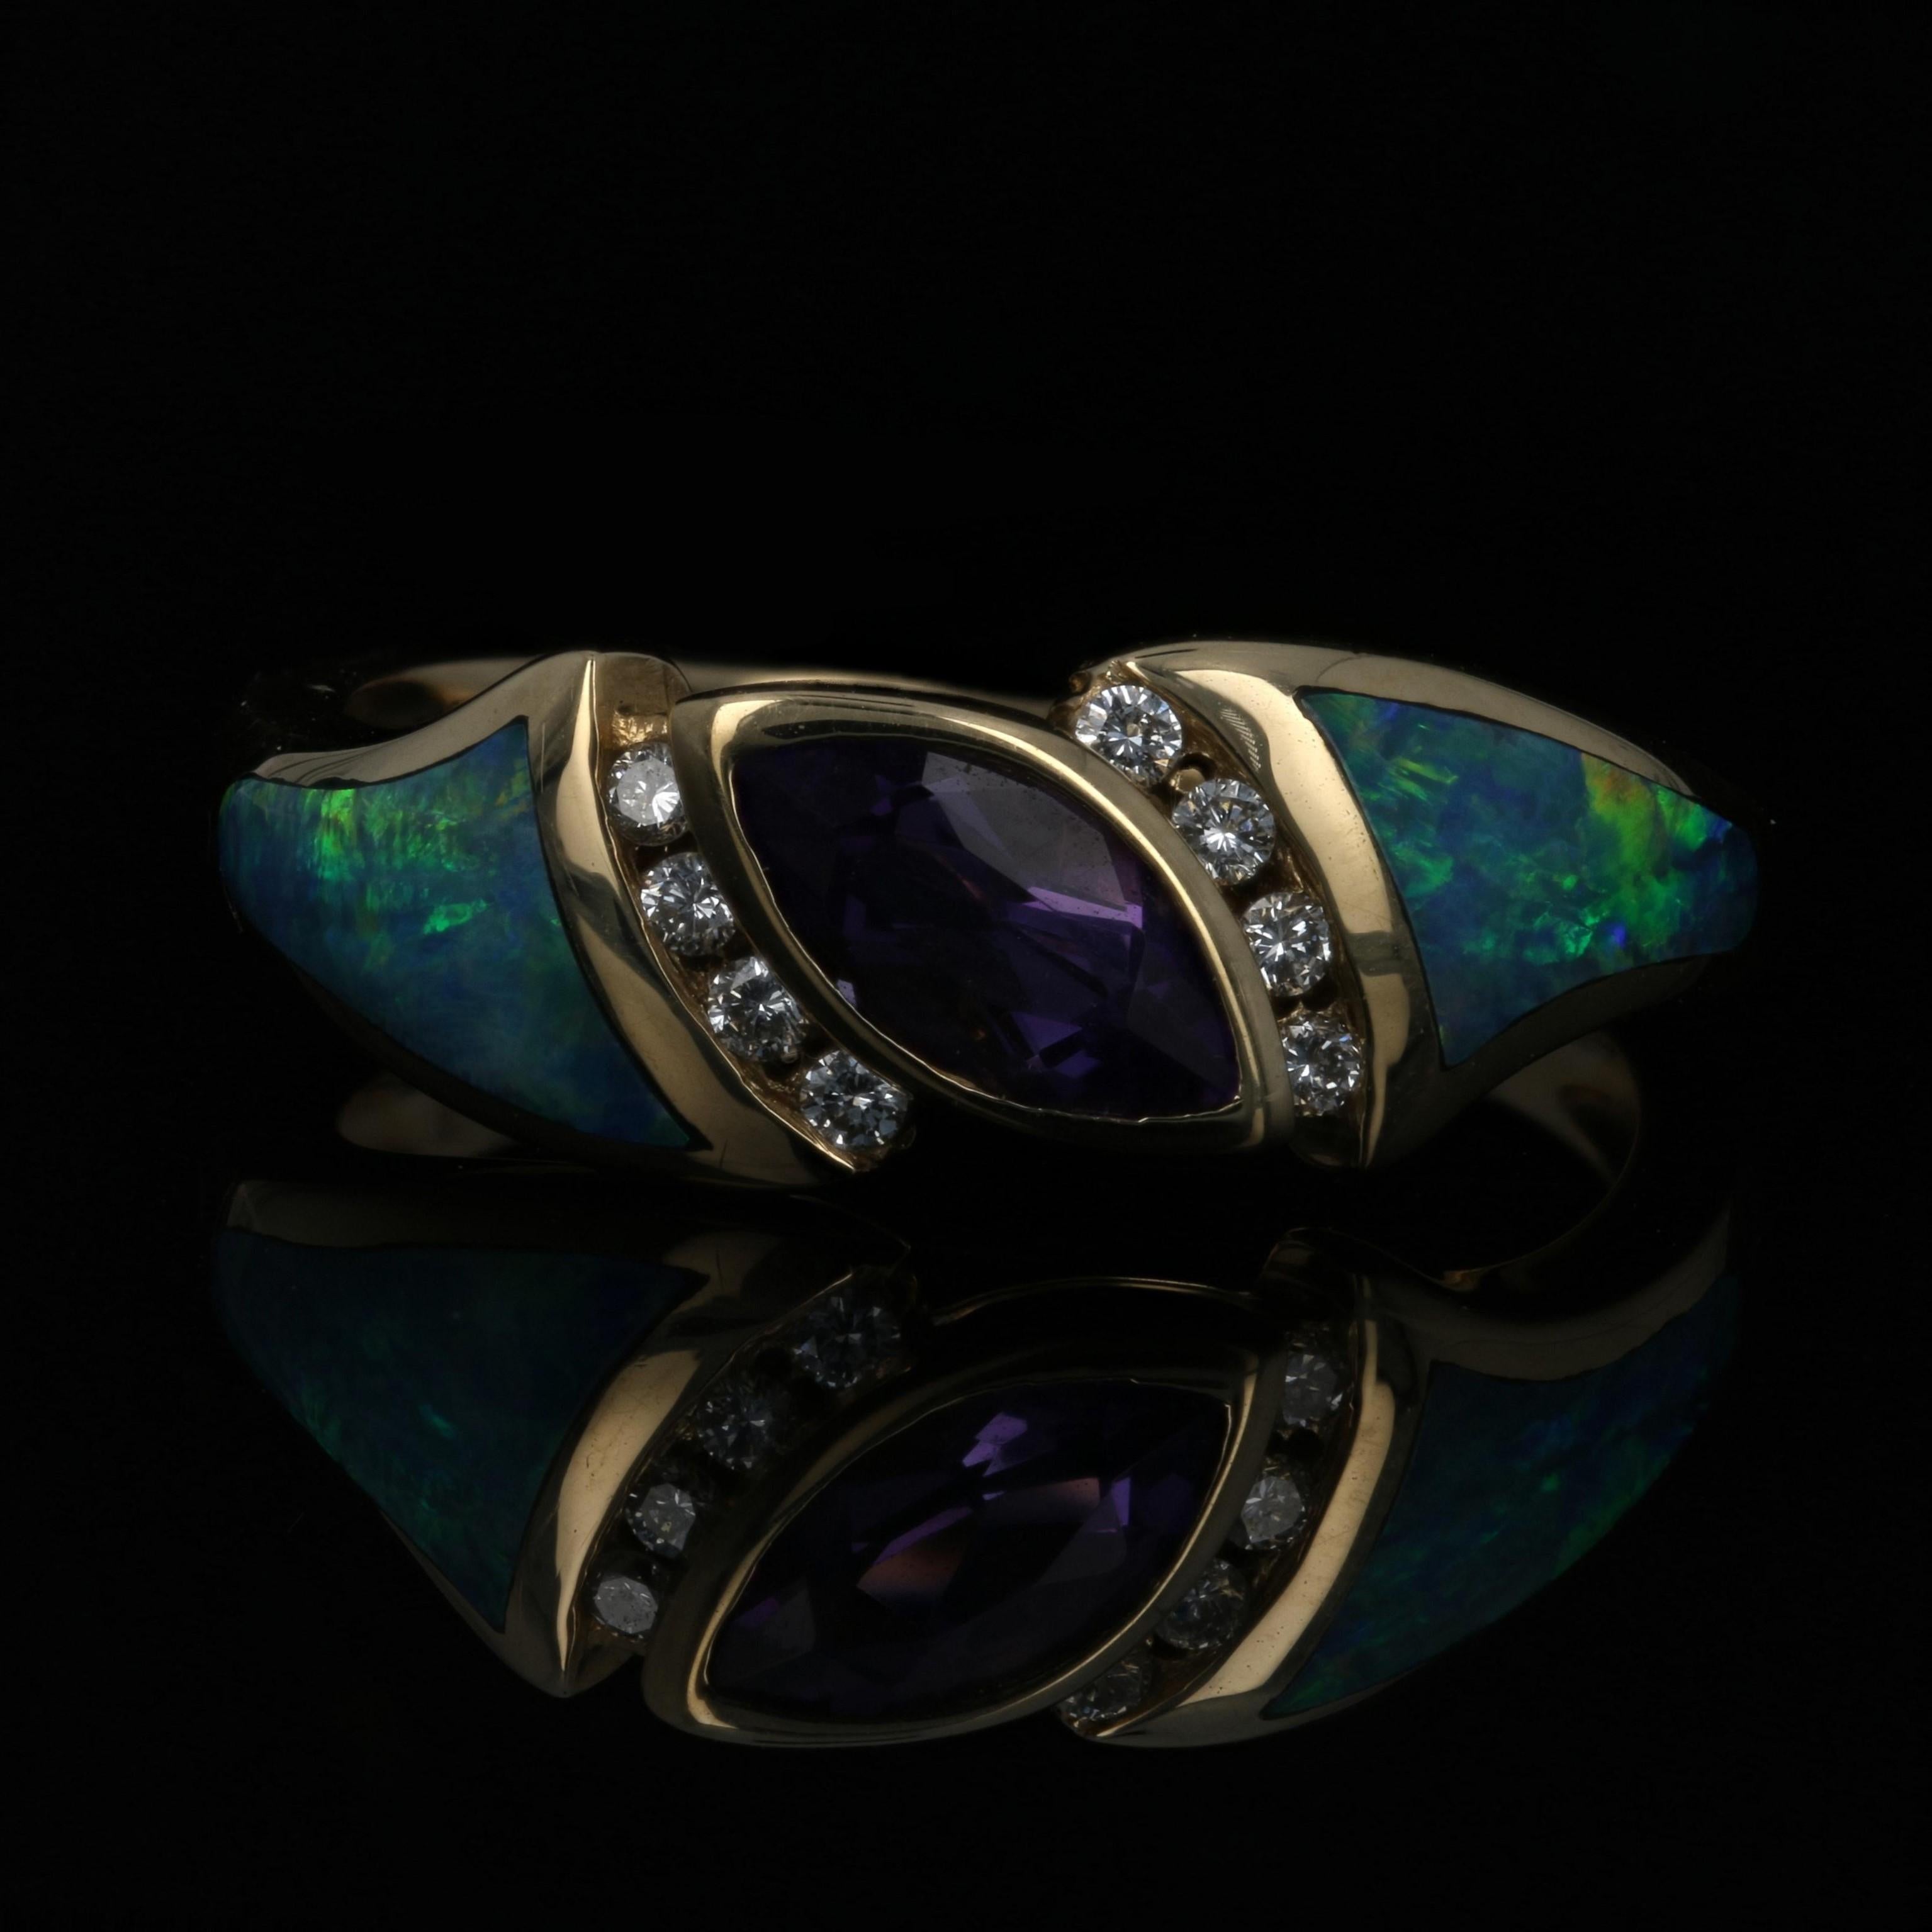 Surprise a special friend or family member with this gorgeous designer ring! Fashioned by Kabana in 14k yellow gold, this chic NEW piece features a diagonally-set amethyst bordered in diamond accents. Inlaid opals adorn the sides of the band as they